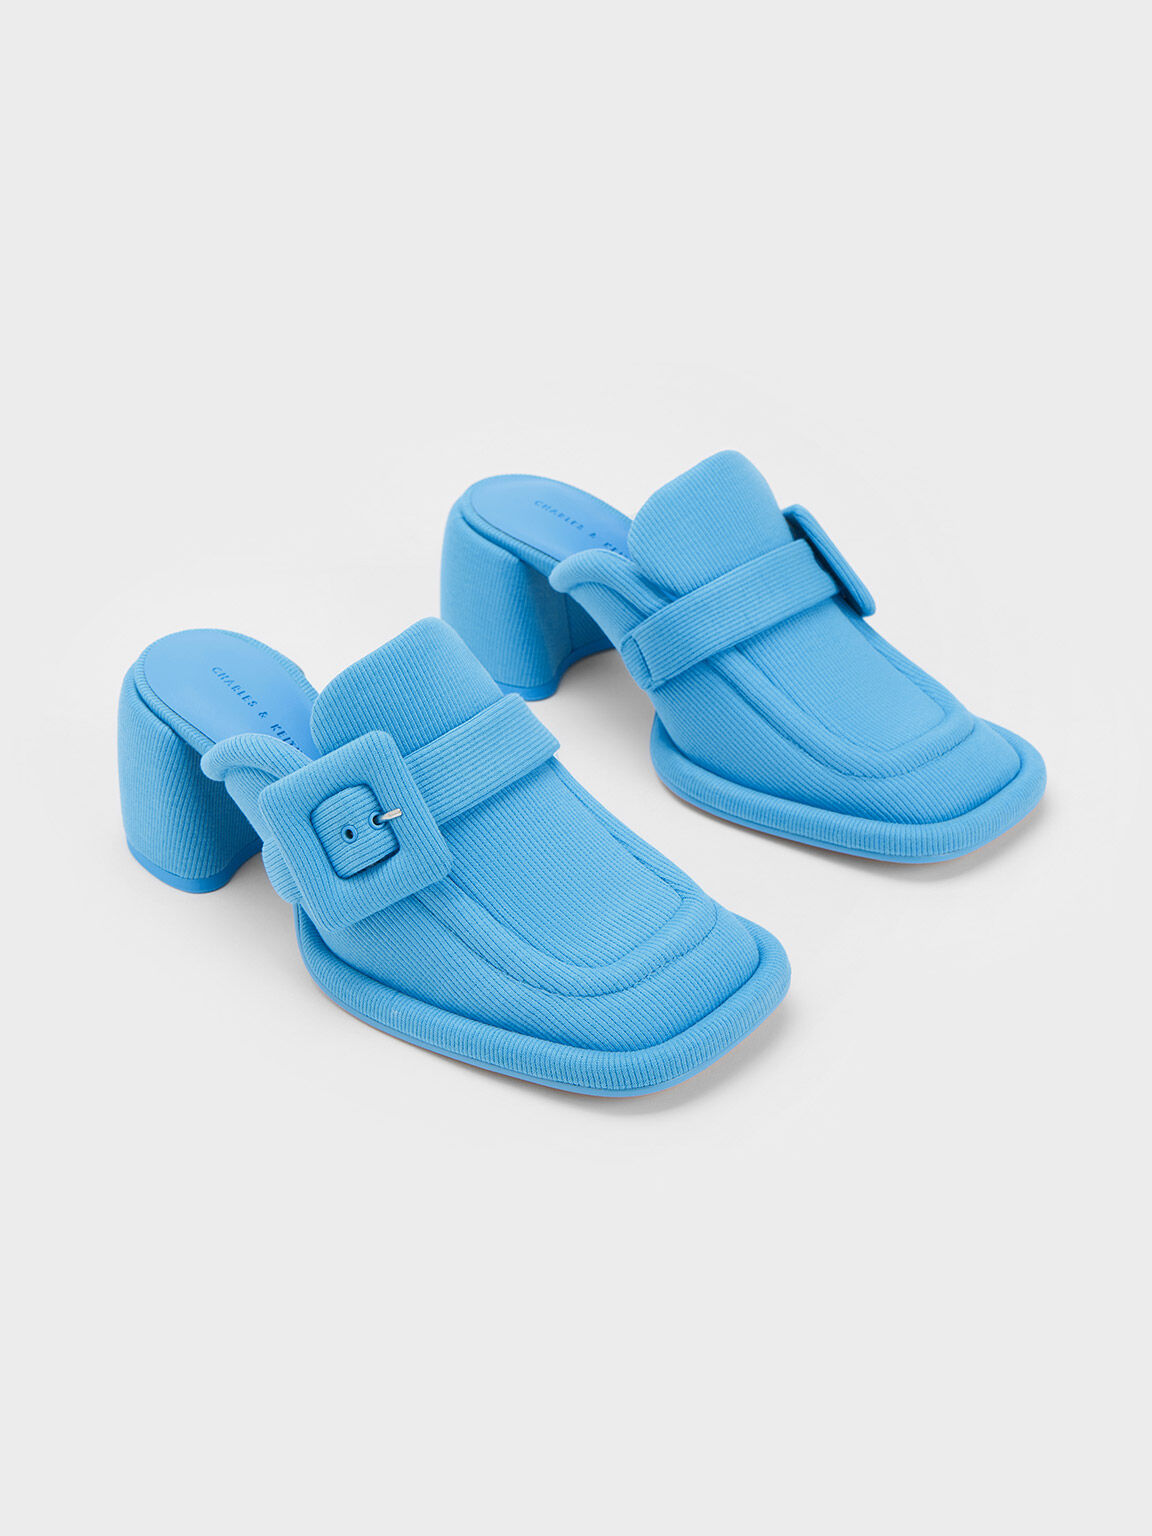 Sinead Woven Buckled Loafer Mules, Blue, hi-res